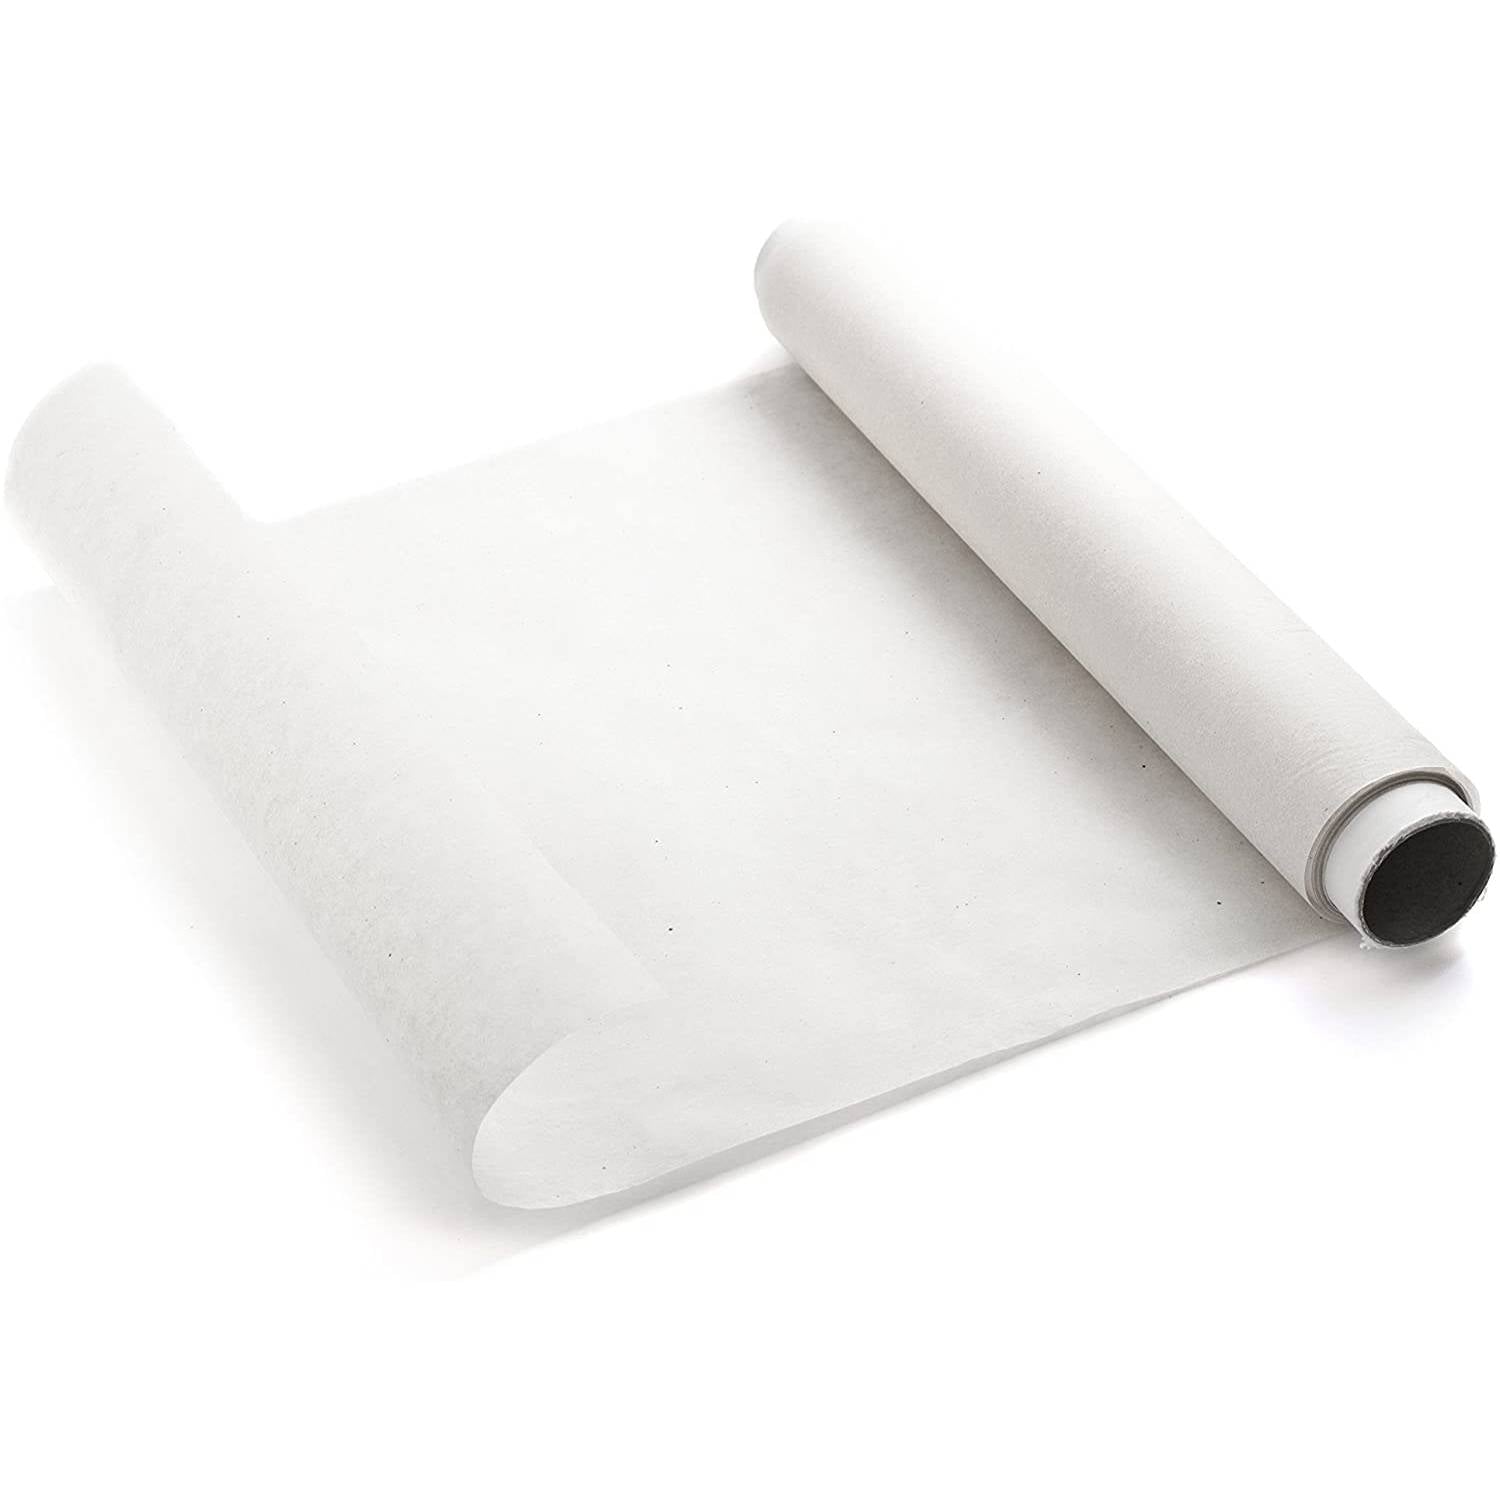 Nicole Home Collection Parchment Paper - 12 in